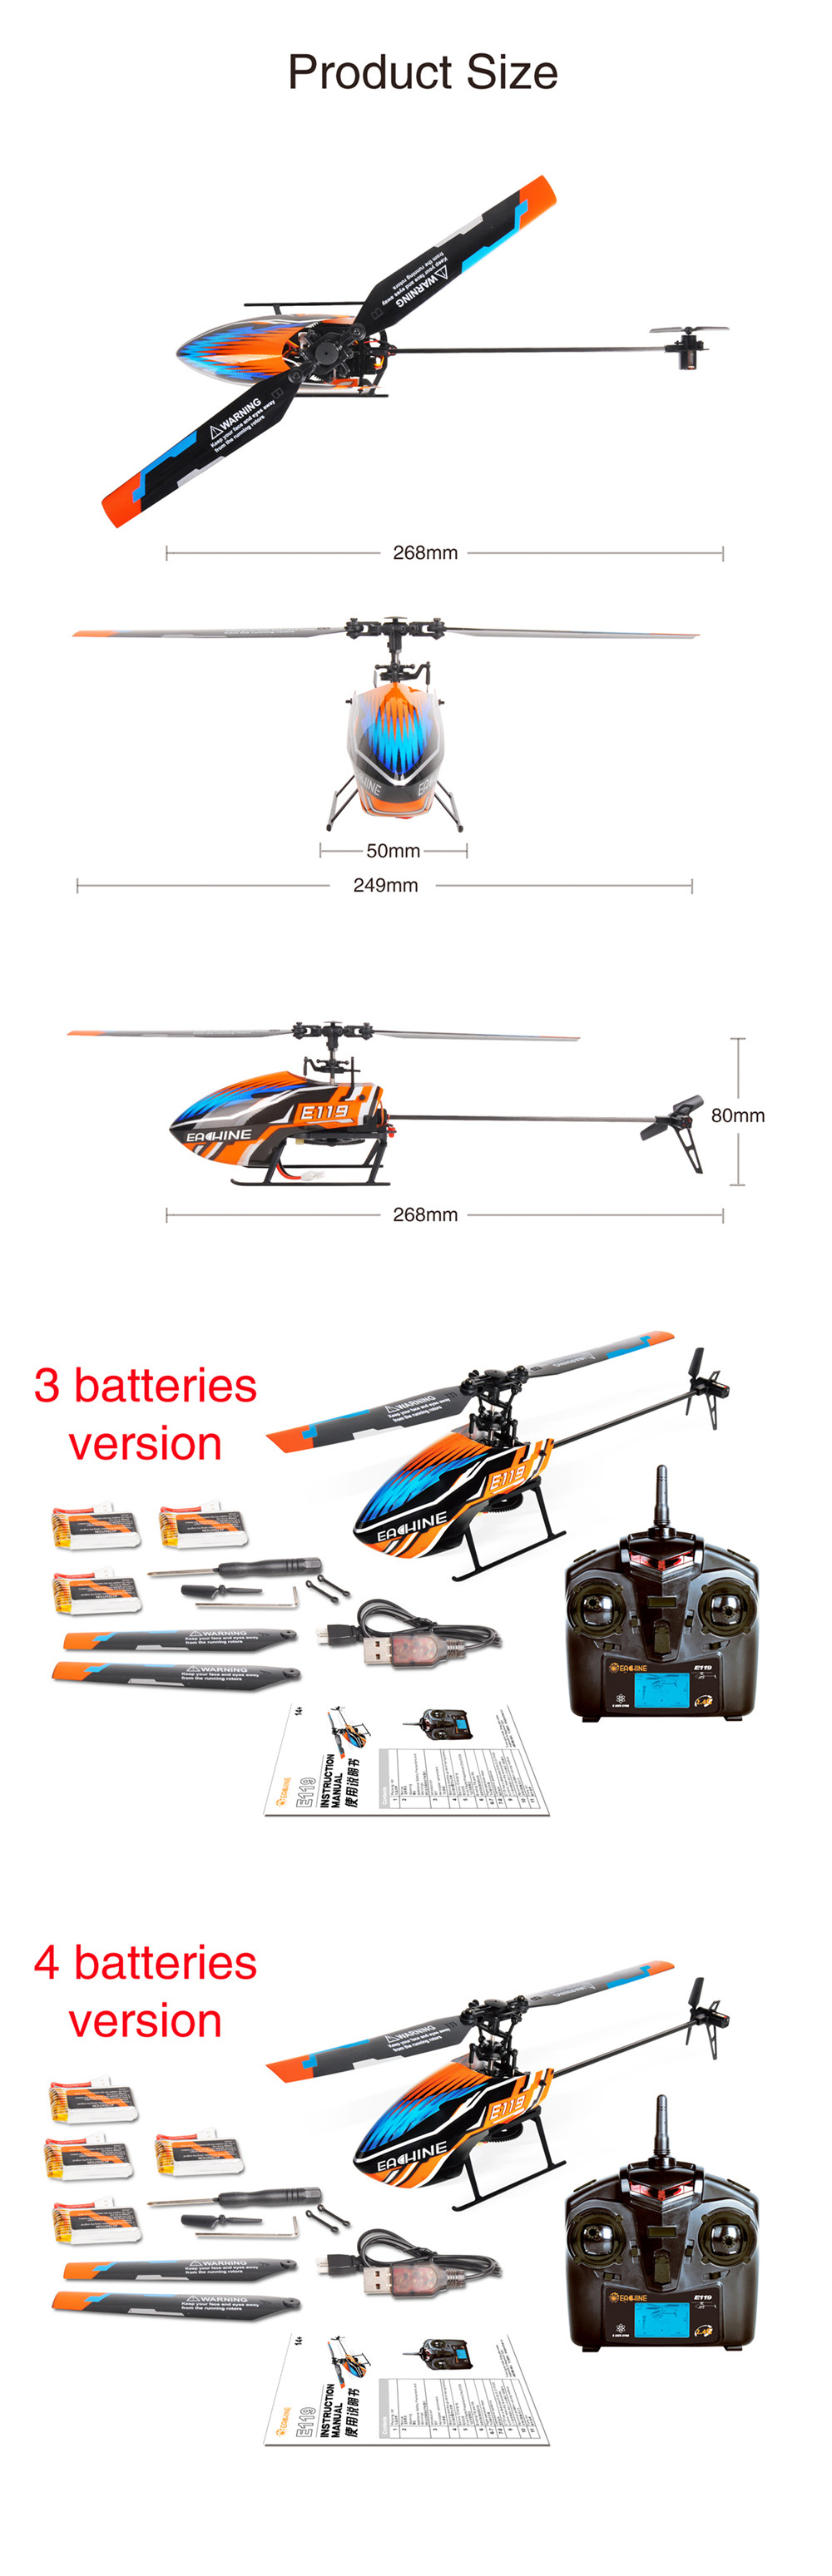 Eachine-E119-24G-4CH-6-Axis-Gyro-Flybarless-RC-Helicopter-RTF-3pcs-4pcs-Batteries-Version-1589346-7